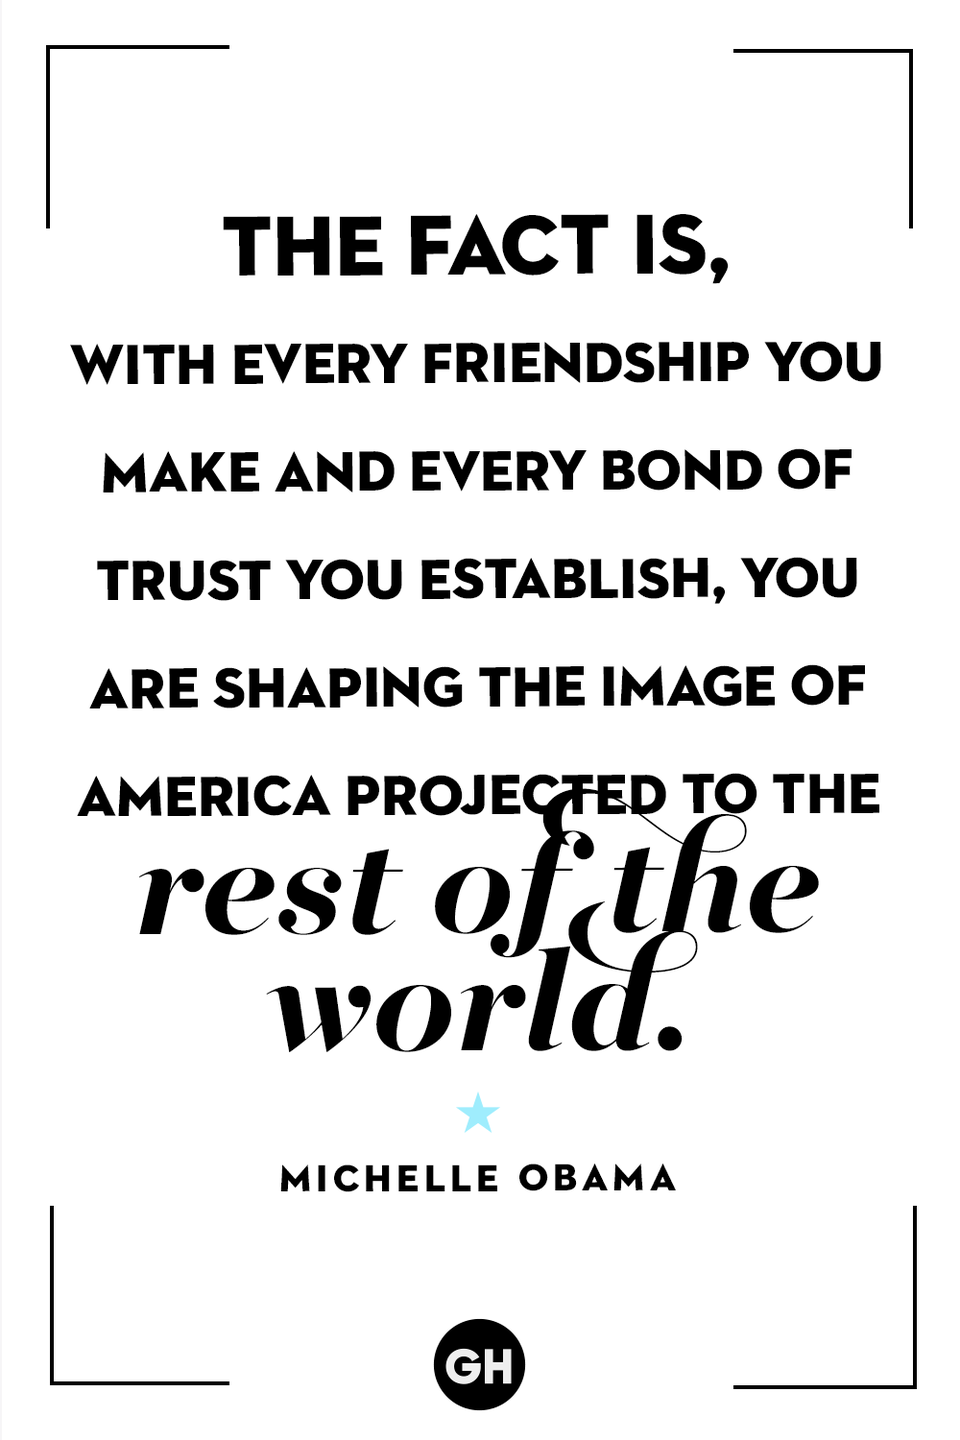 <p>"The fact is, with every friendship you make and every bond of trust you establish, you are shaping the image of America projected to the rest of the world."</p>